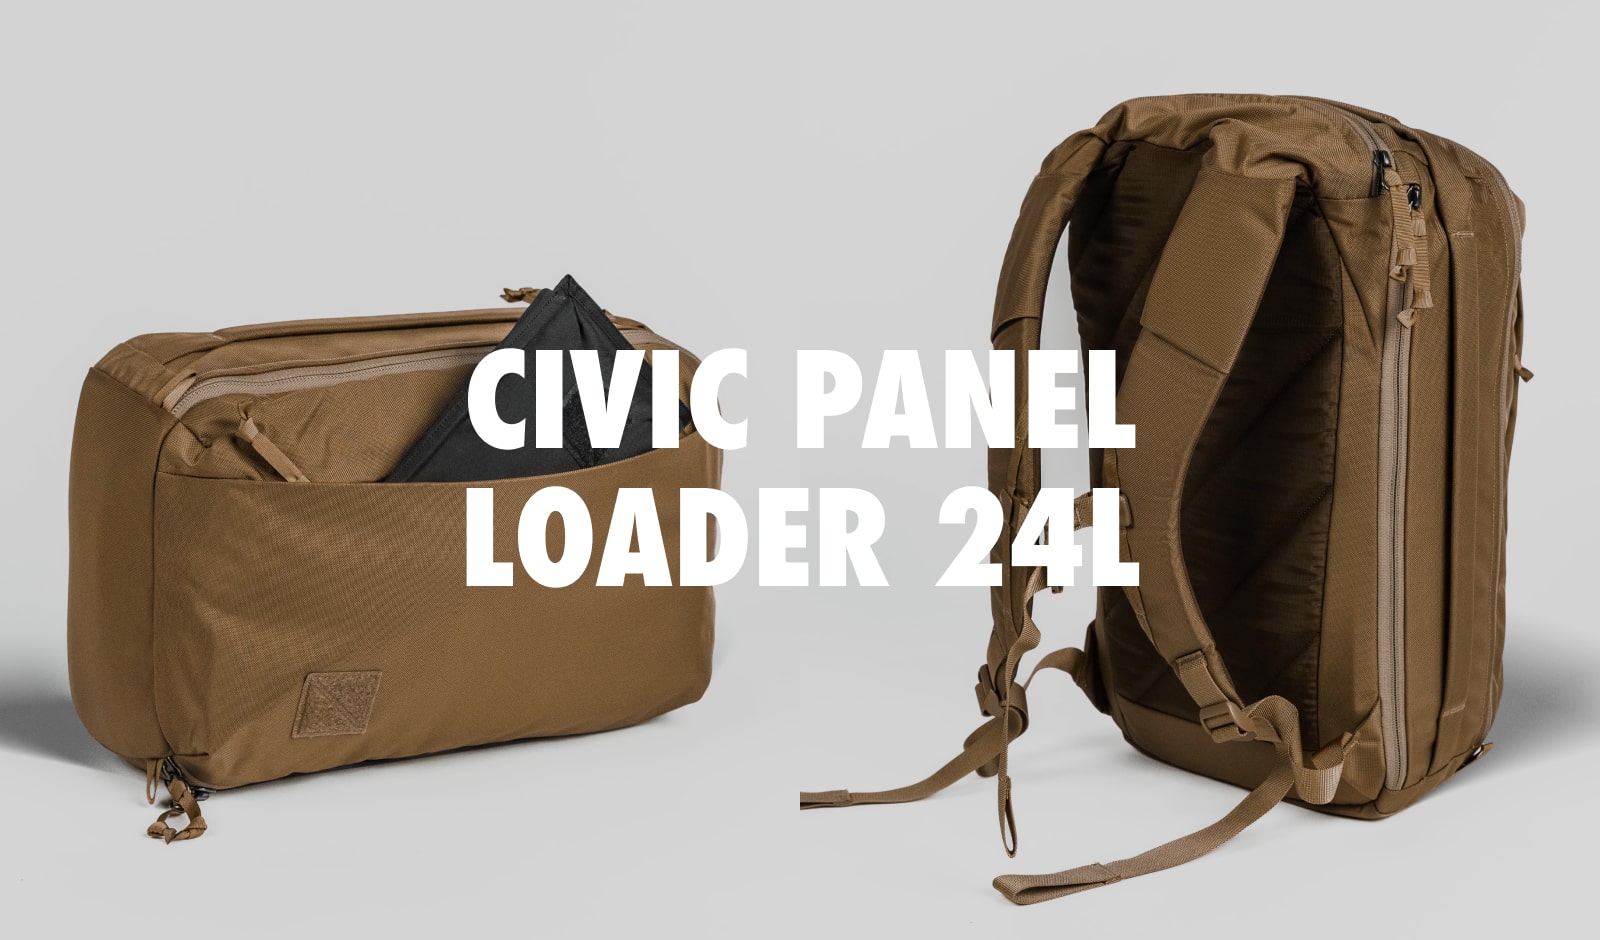 Civic panel loader 24L in Coyote Brown